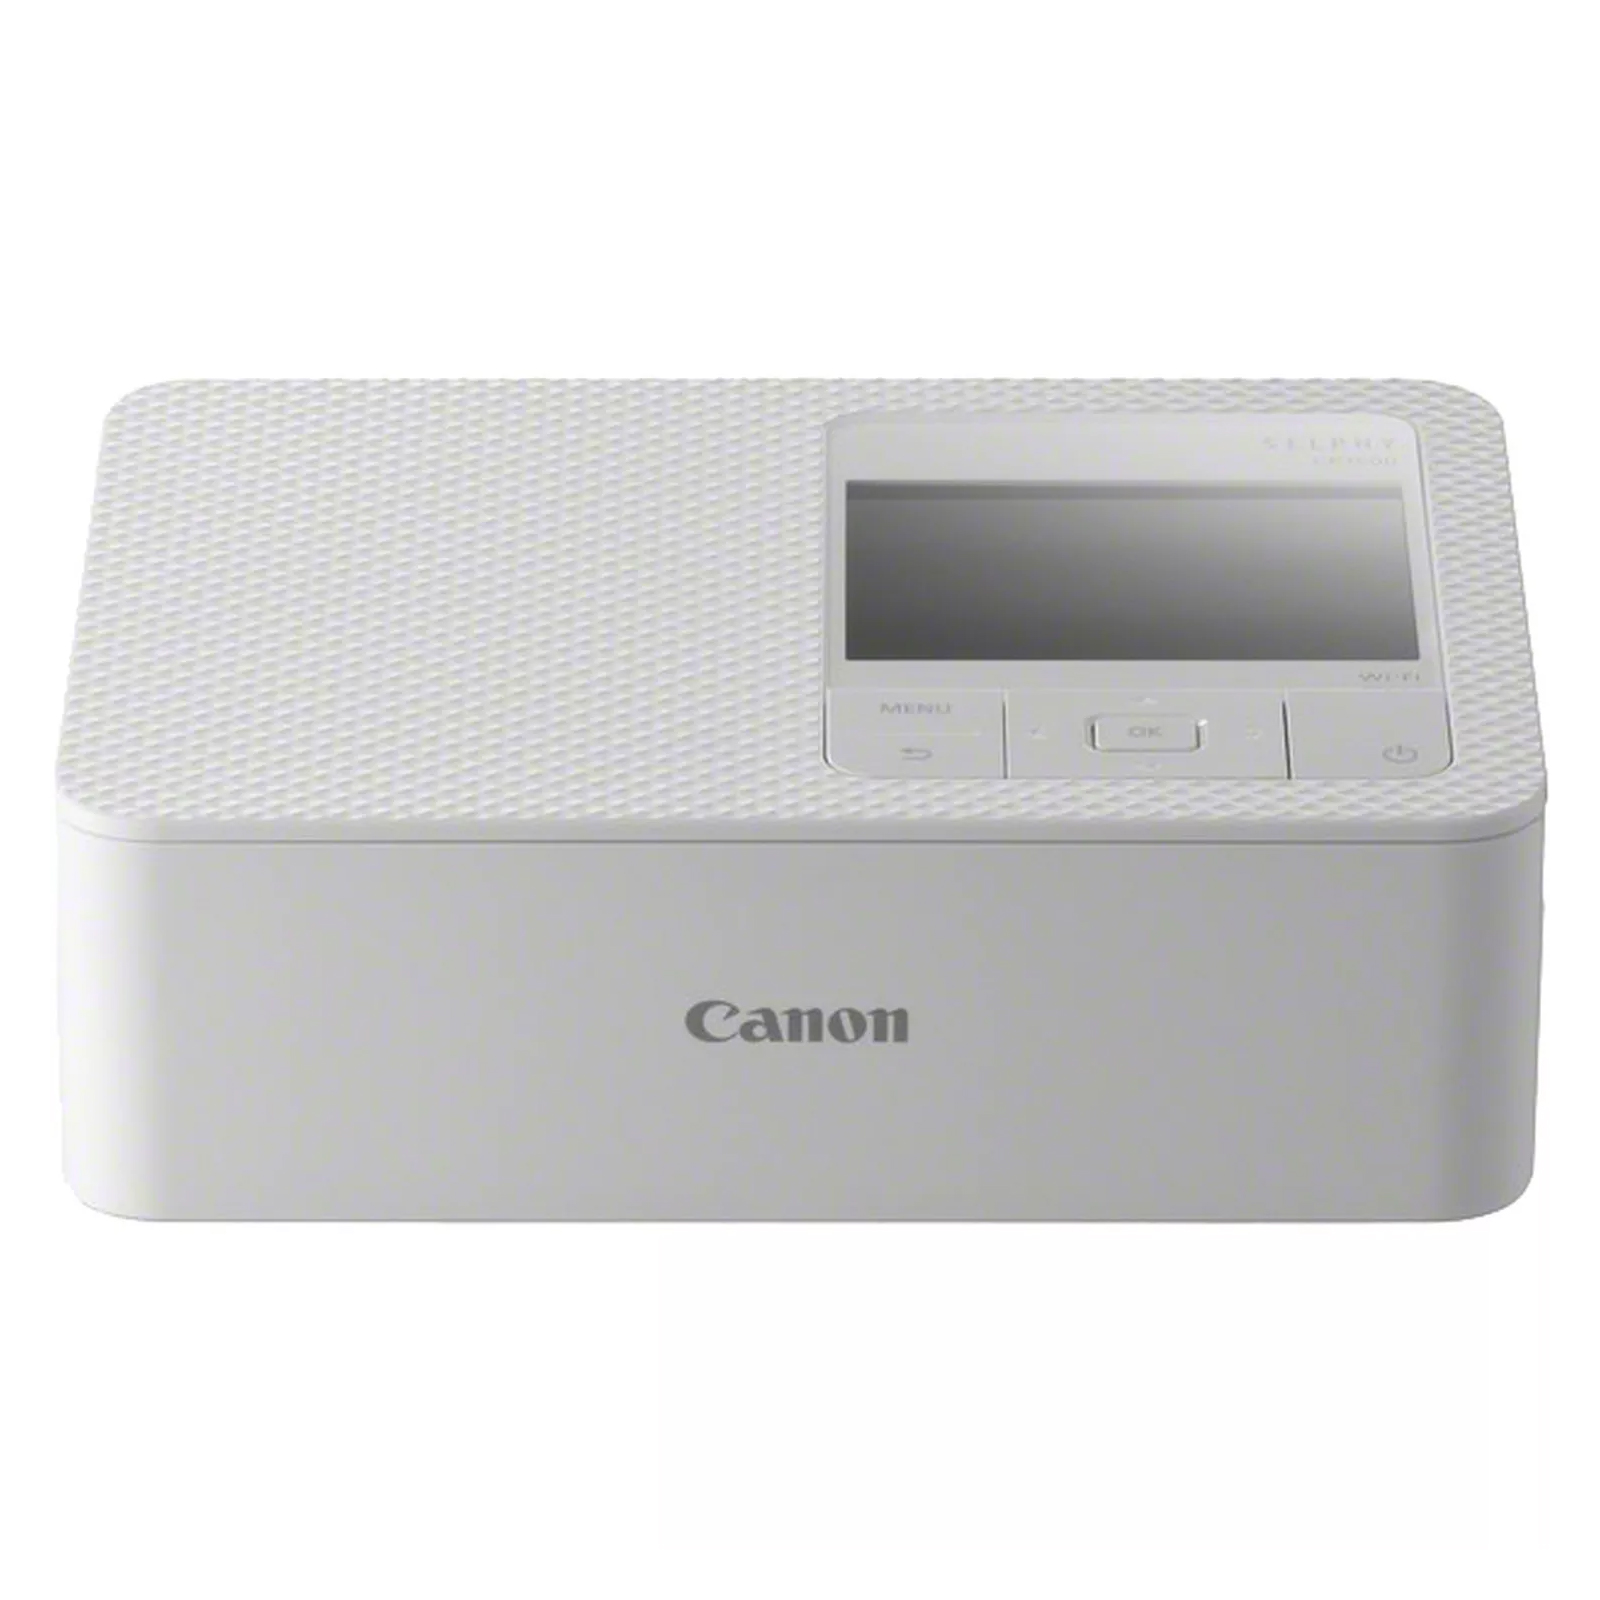 Image of Canon Selphy CP1500 Wireless Photo Printer - White